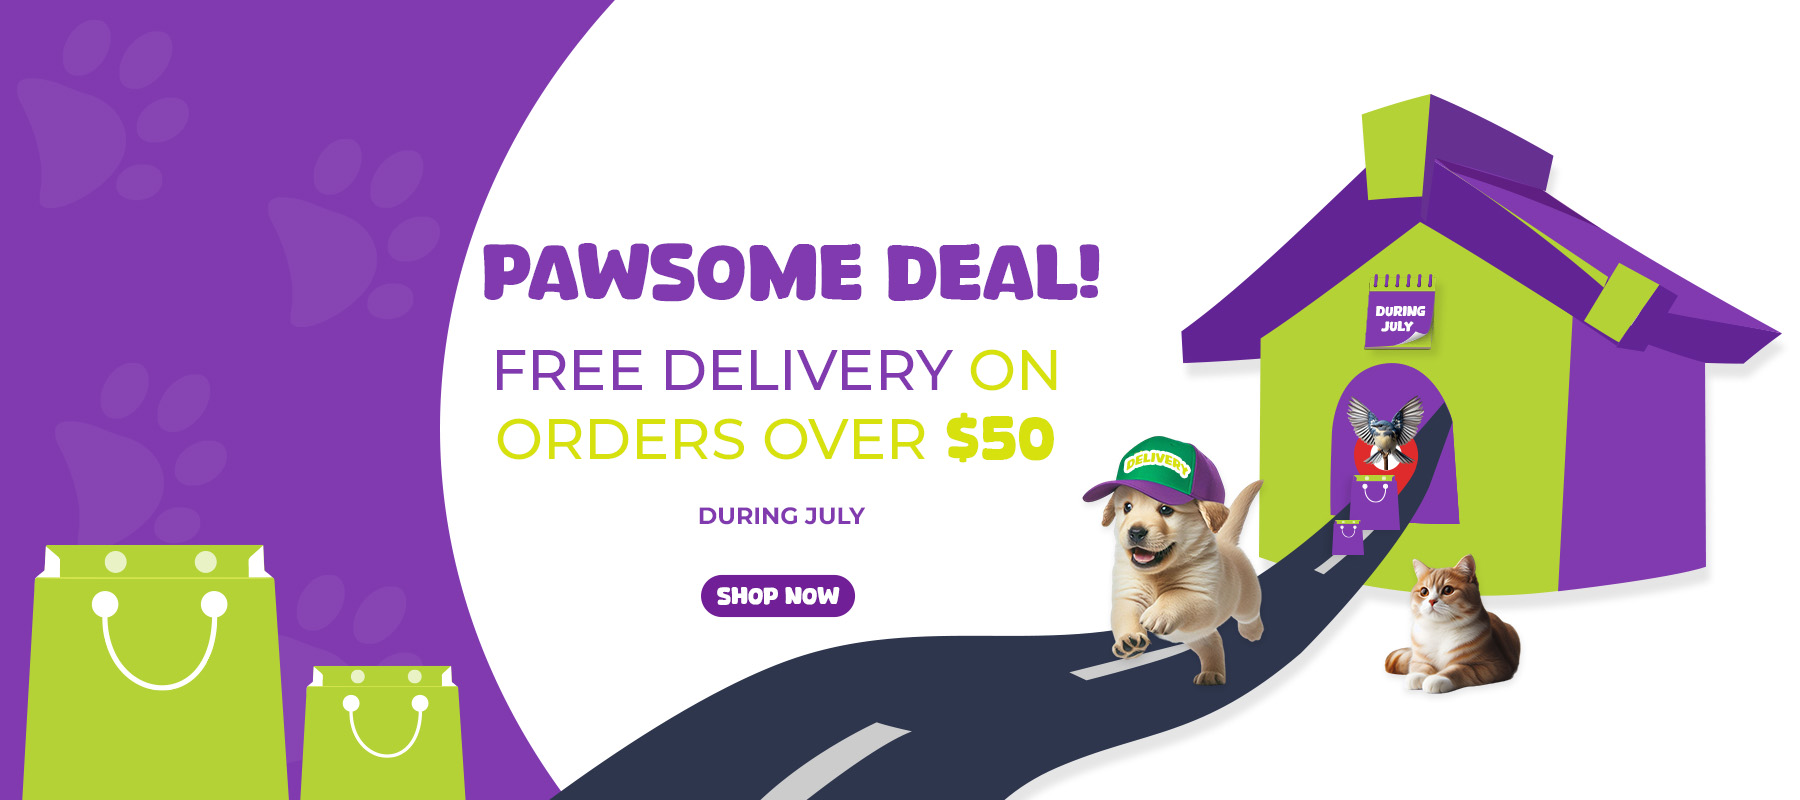 waw pet free delivery